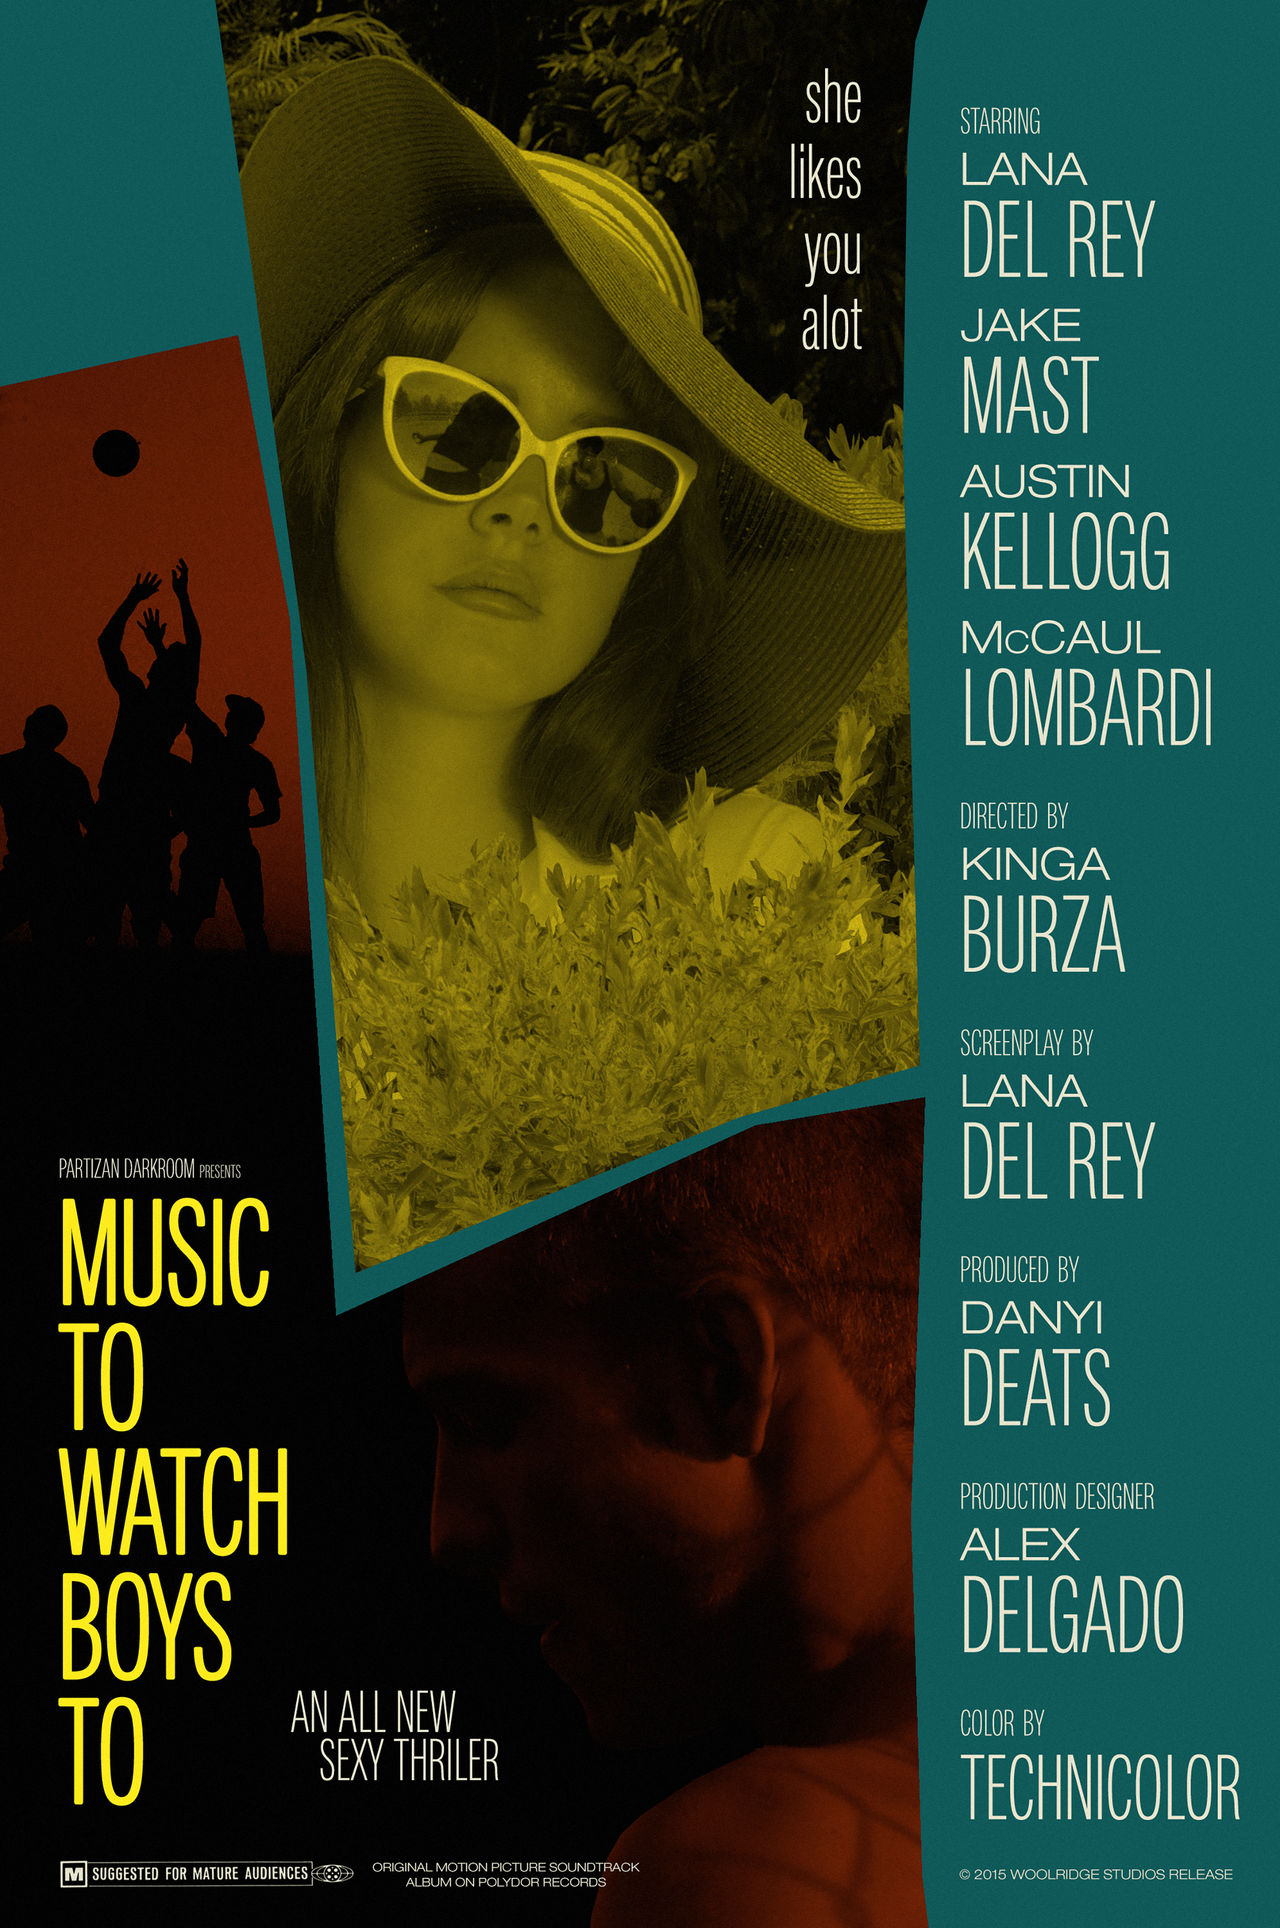 music_to_watch_boys_to_poster_by_kalluml